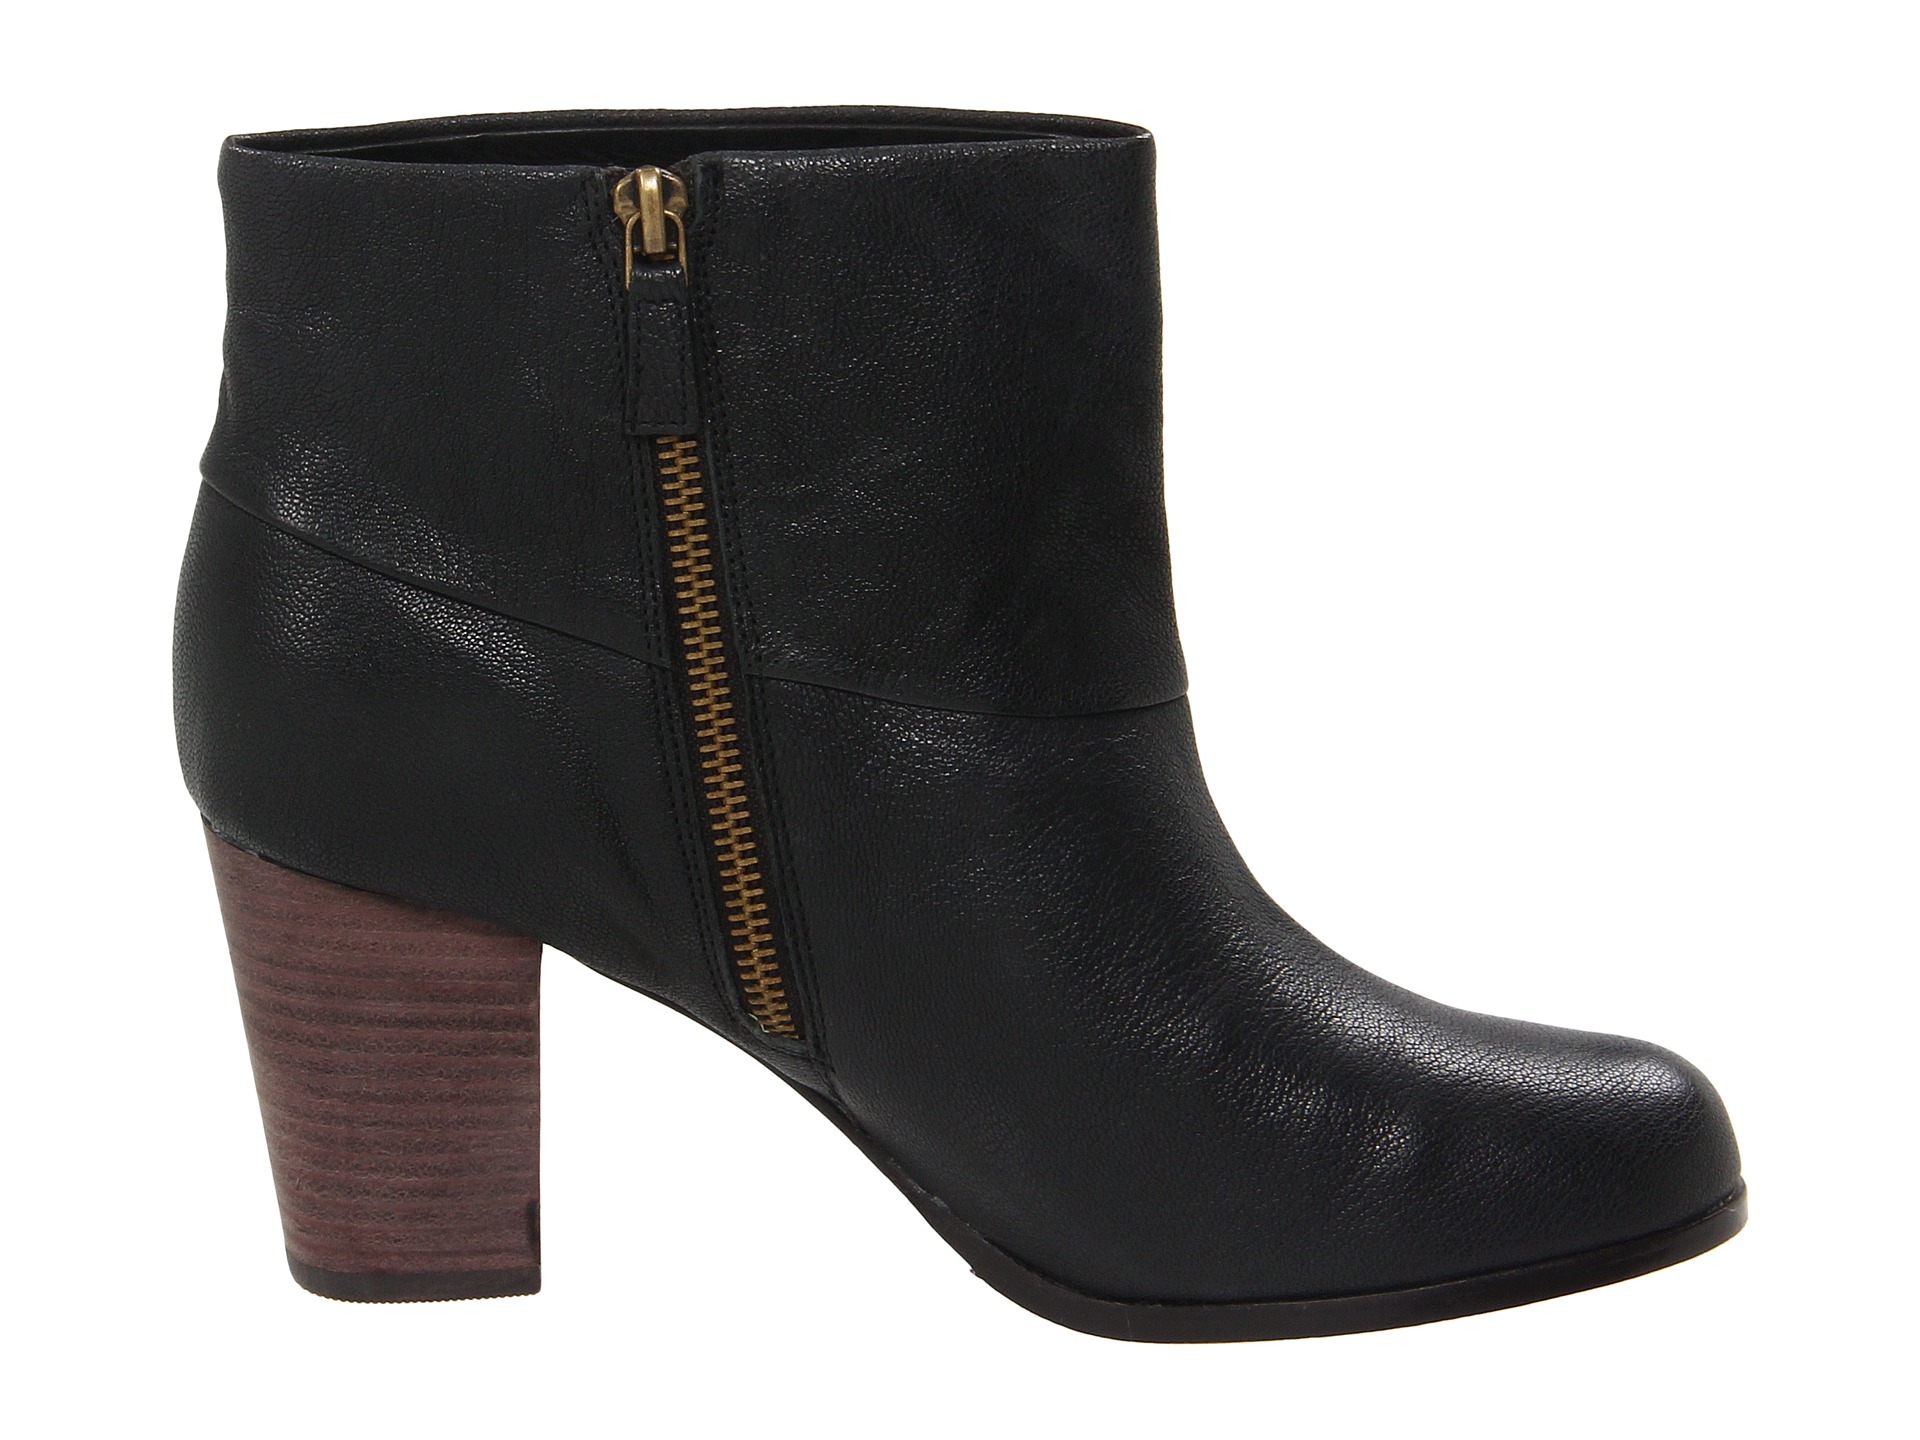 Cole Haan Cassidy Bootie Black | Shipped Free at Zappos